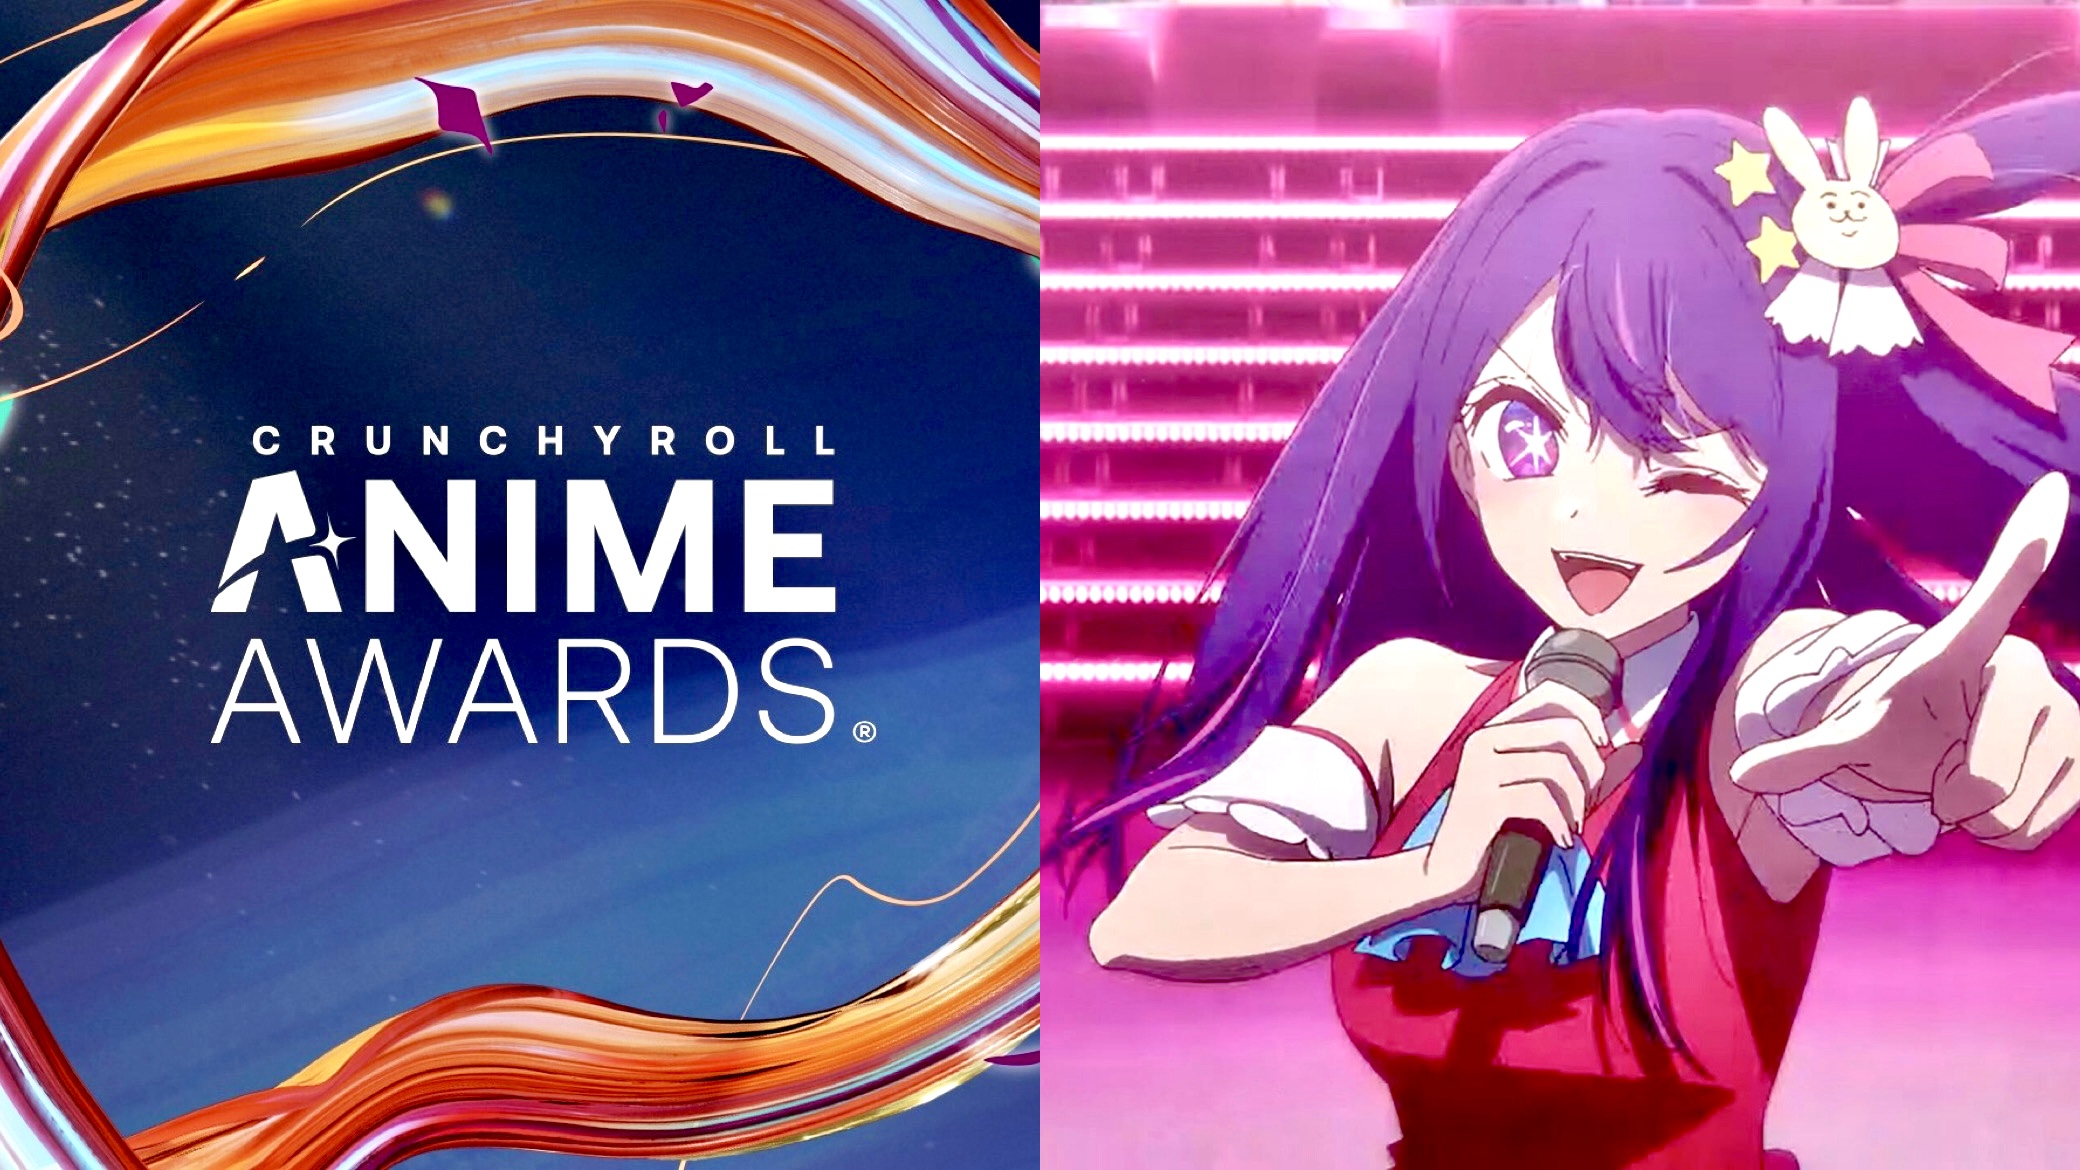 What Time Is the Crunchyroll Anime Awards?